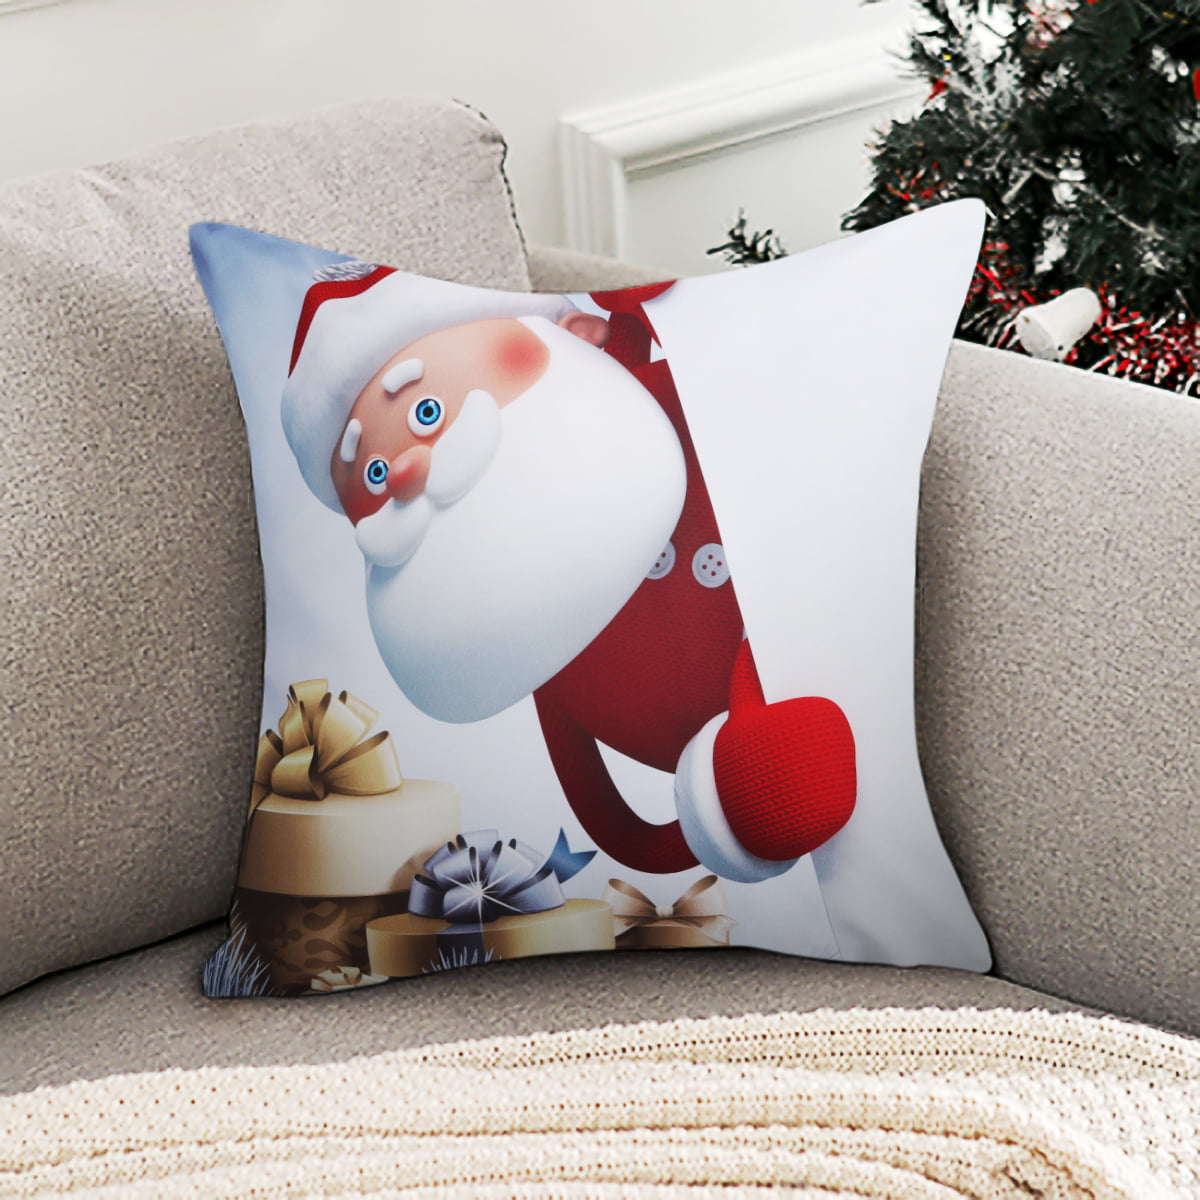 Details about   Pillow Case Sofa Cushion Covers Home Bedrom Christmas Snowflake Santa Decoration